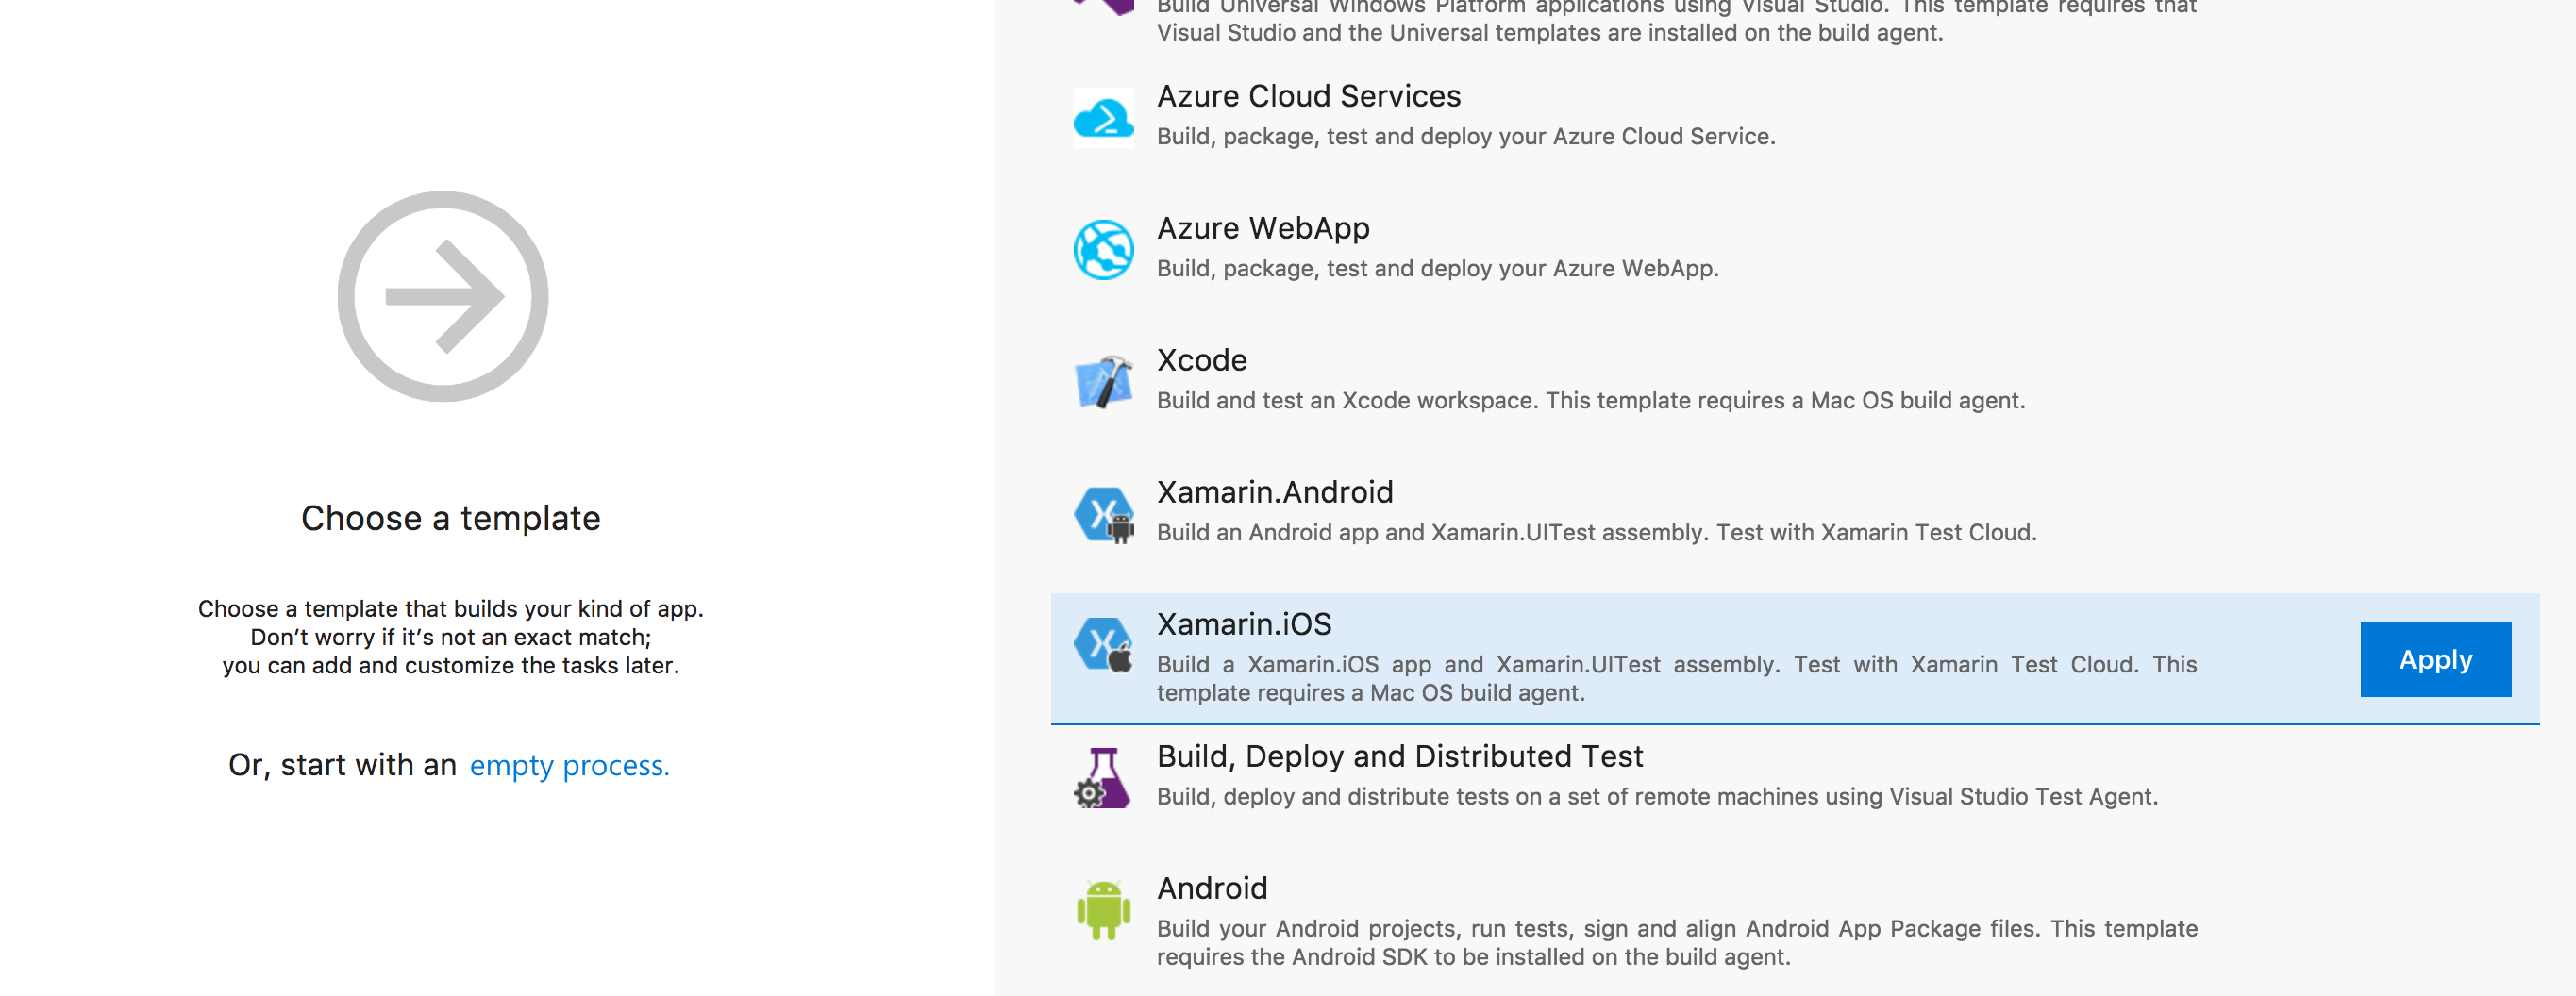 Applying the Xamarin iOS template to our build definition